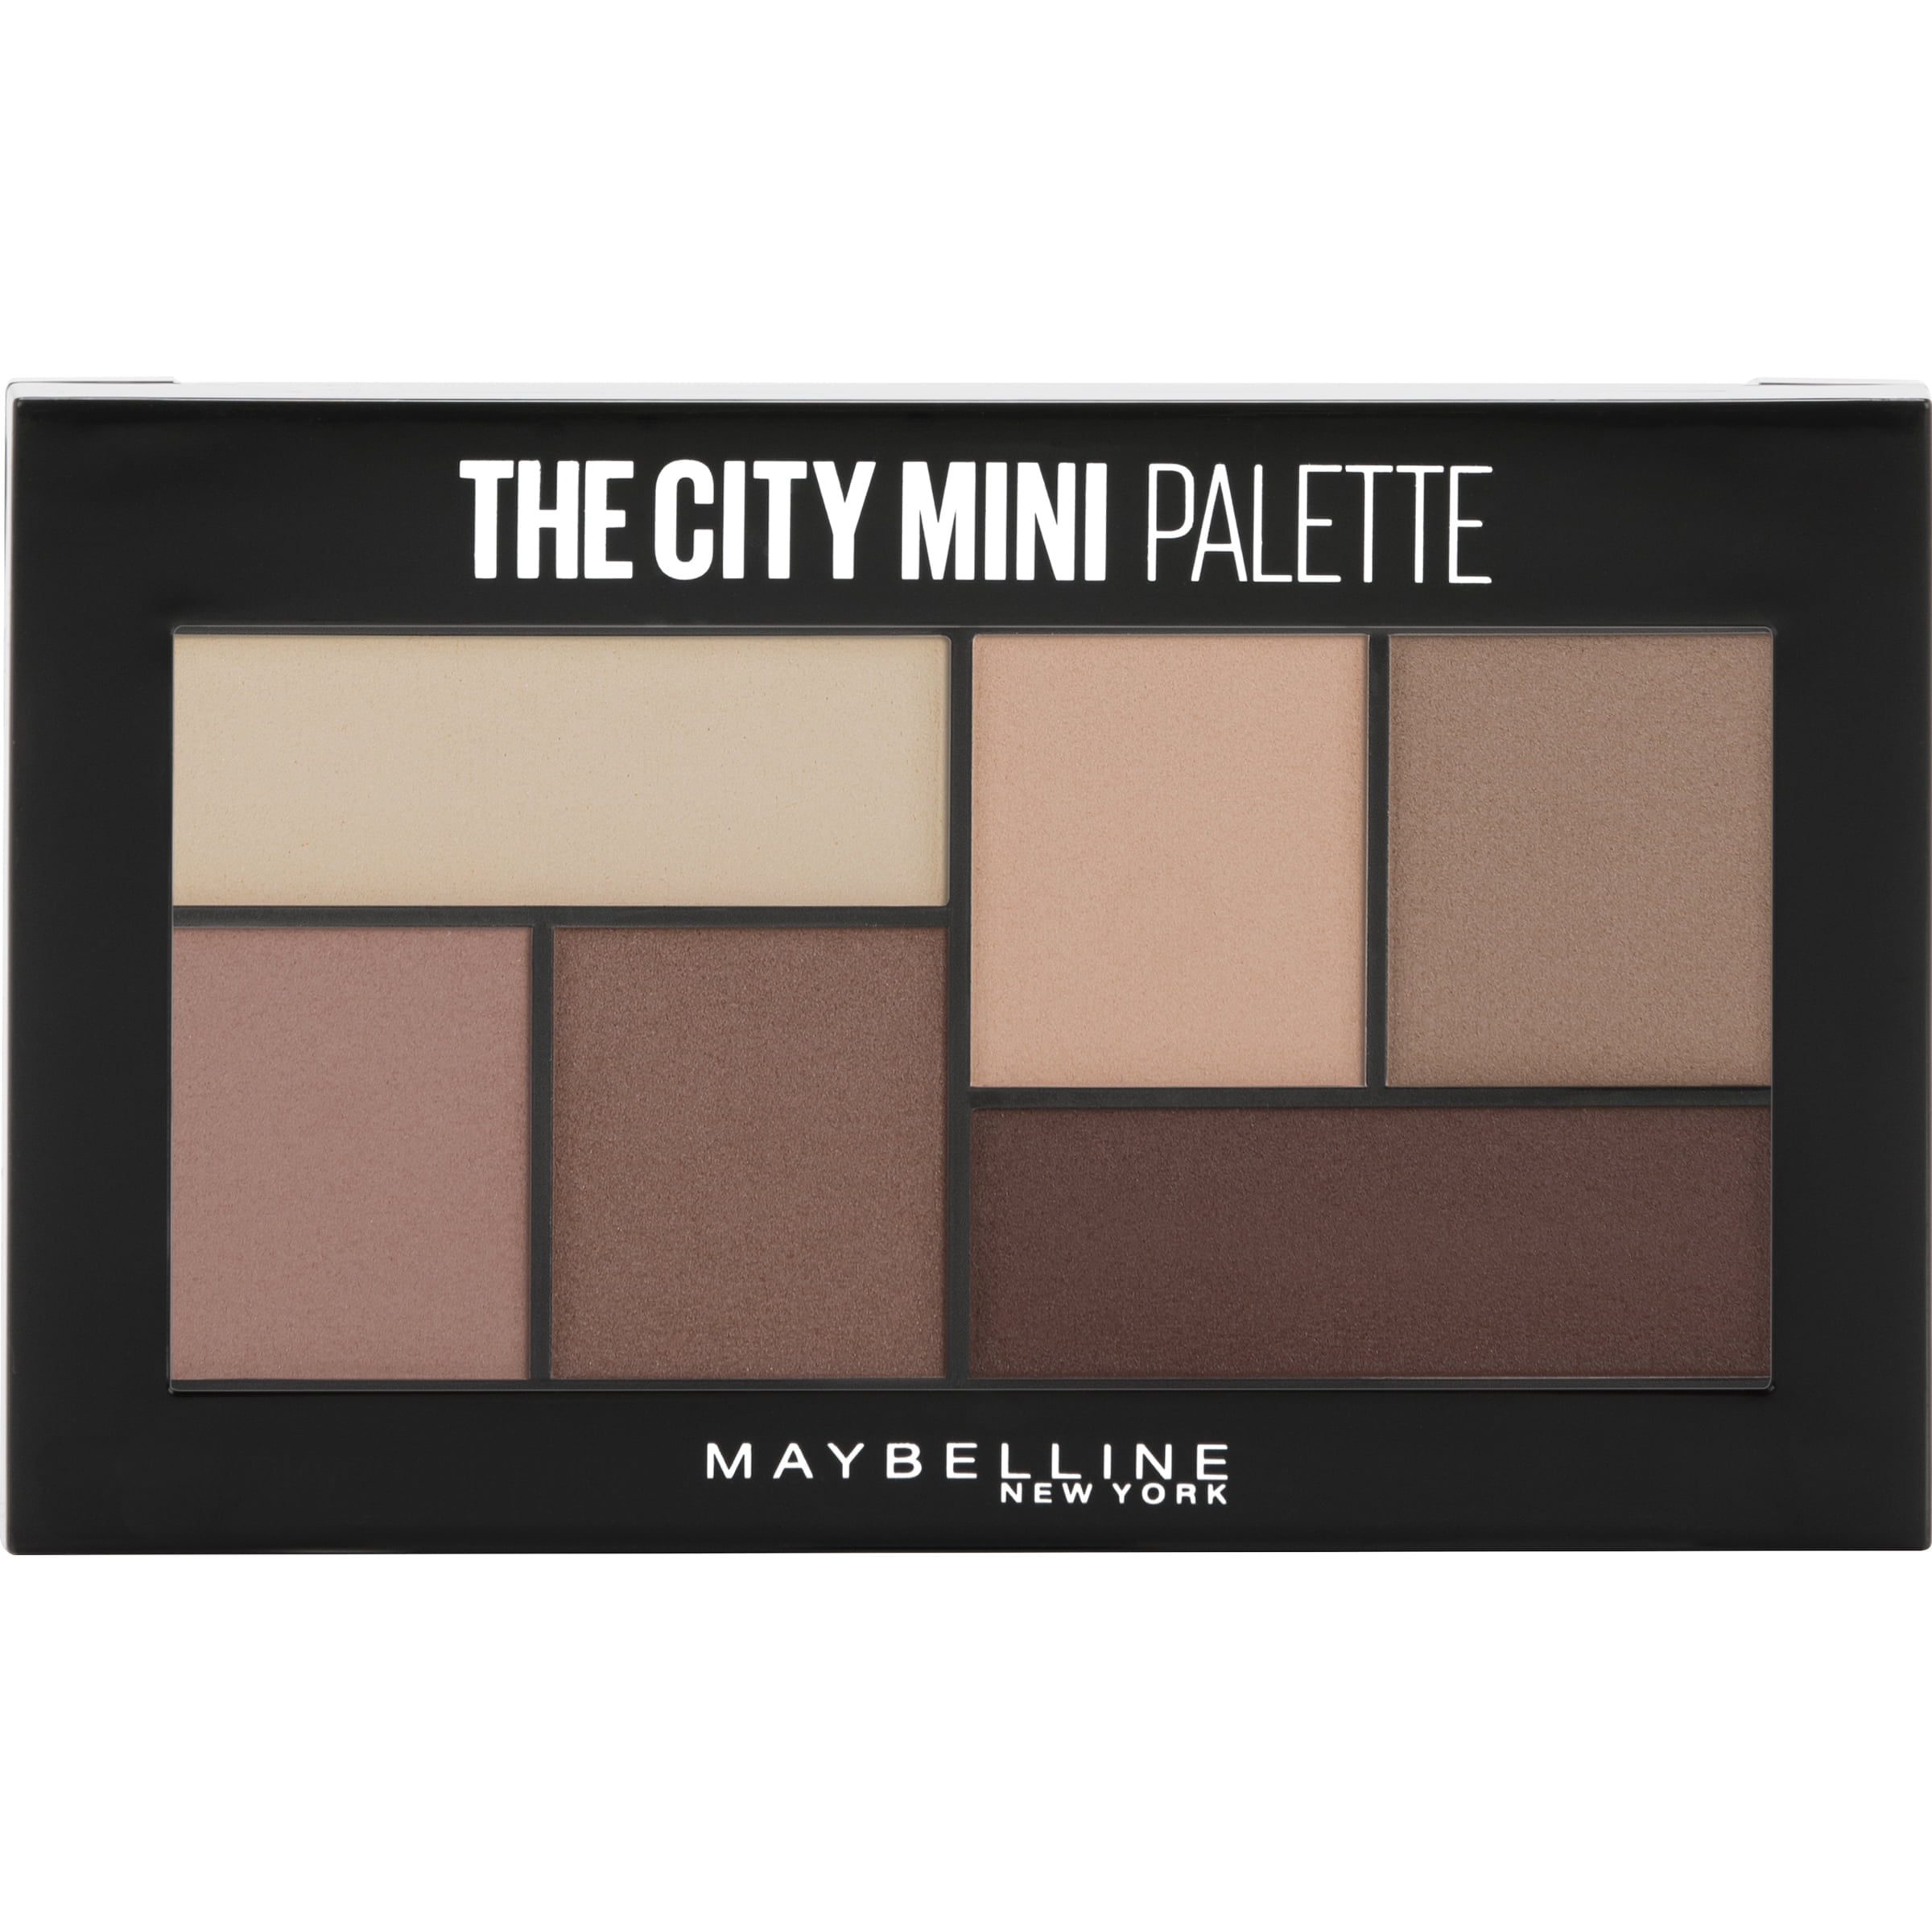 City Maybelline Matte Palette Mini Eyeshadow About The Makeup, Town